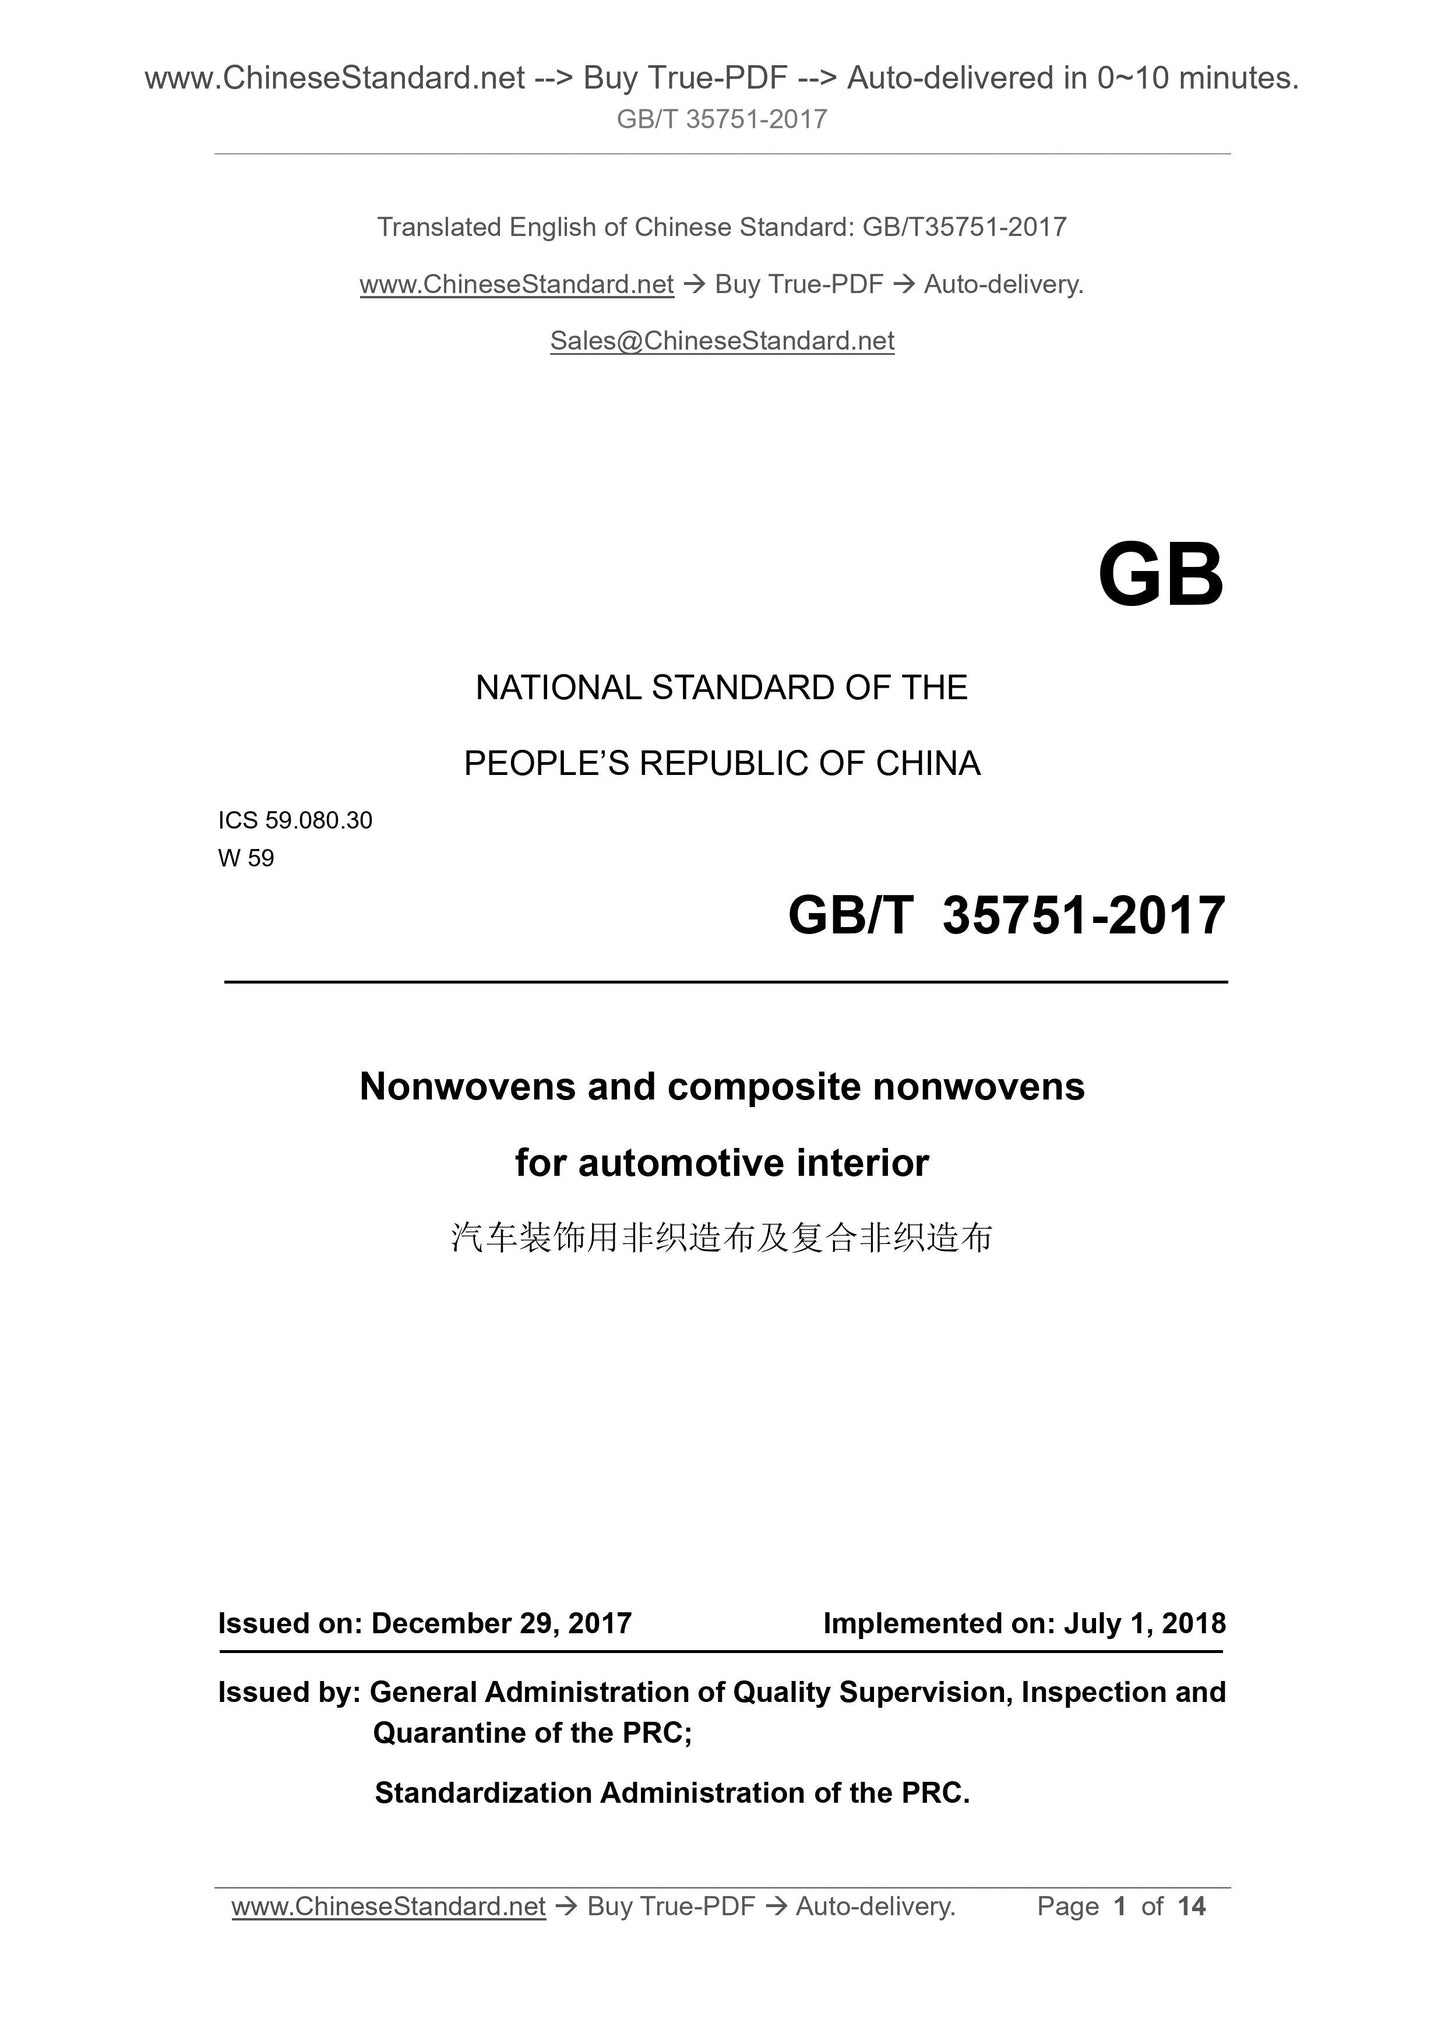 GB/T 35751-2017 Page 1